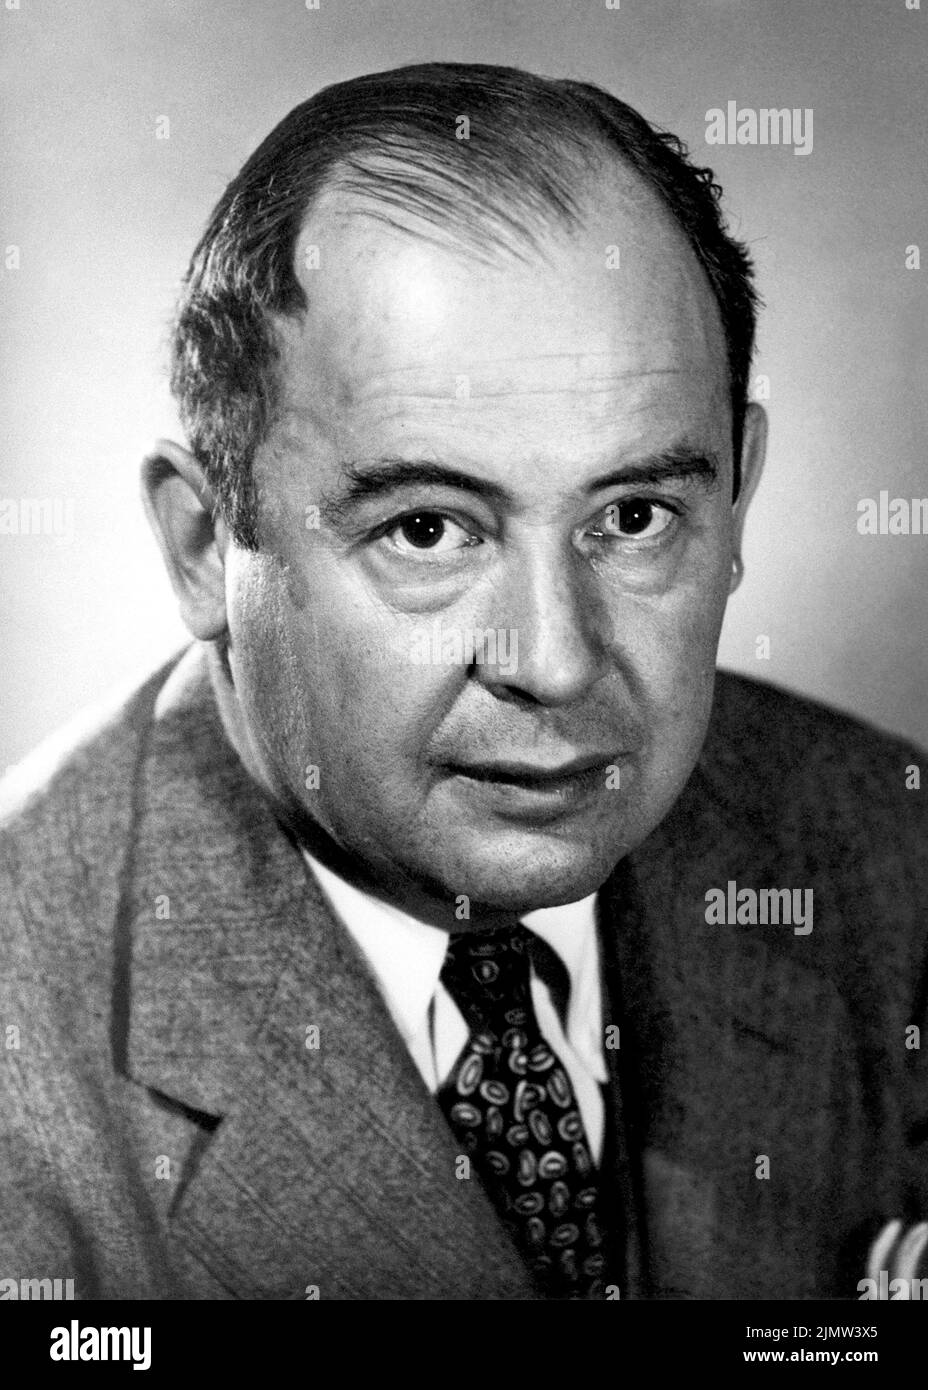 John von Neumann (1903-1957), Hungarian-American mathematician, physicist, computer scientist, engineer and polymath. Von Neumann made major contributions to a vast number of areas. During World War II he worked on the Manhattan Project and later became Commissioner of the U.S. Atomic Energy Commission. Photo: 1956. Stock Photo